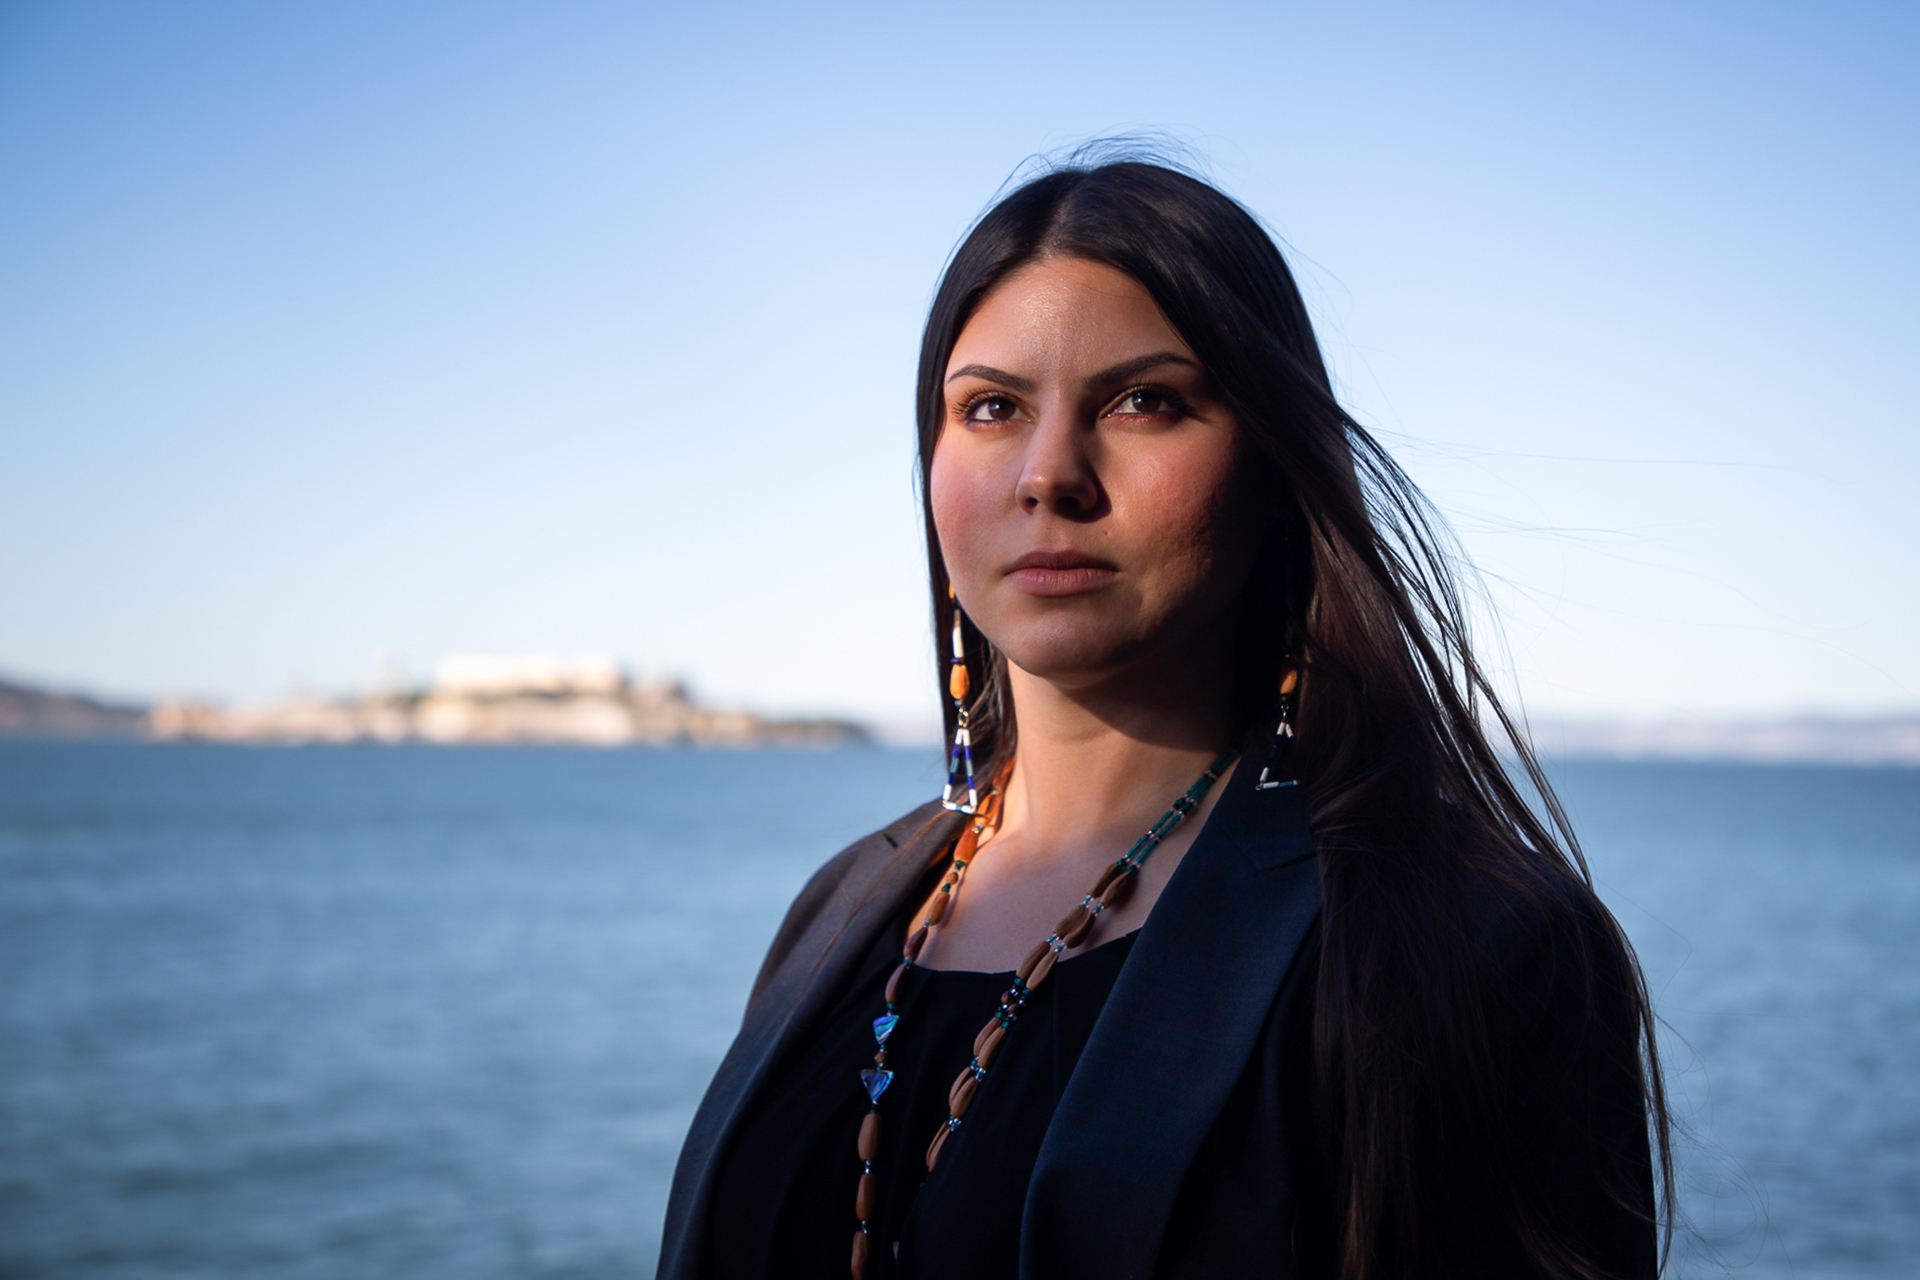 A Native American woman gazes into the camera. Her hair is long and dark, and she's wearing a beaded necklace and earrings. Behind her is the water, and just visible out of focus is Alcatraz Island.